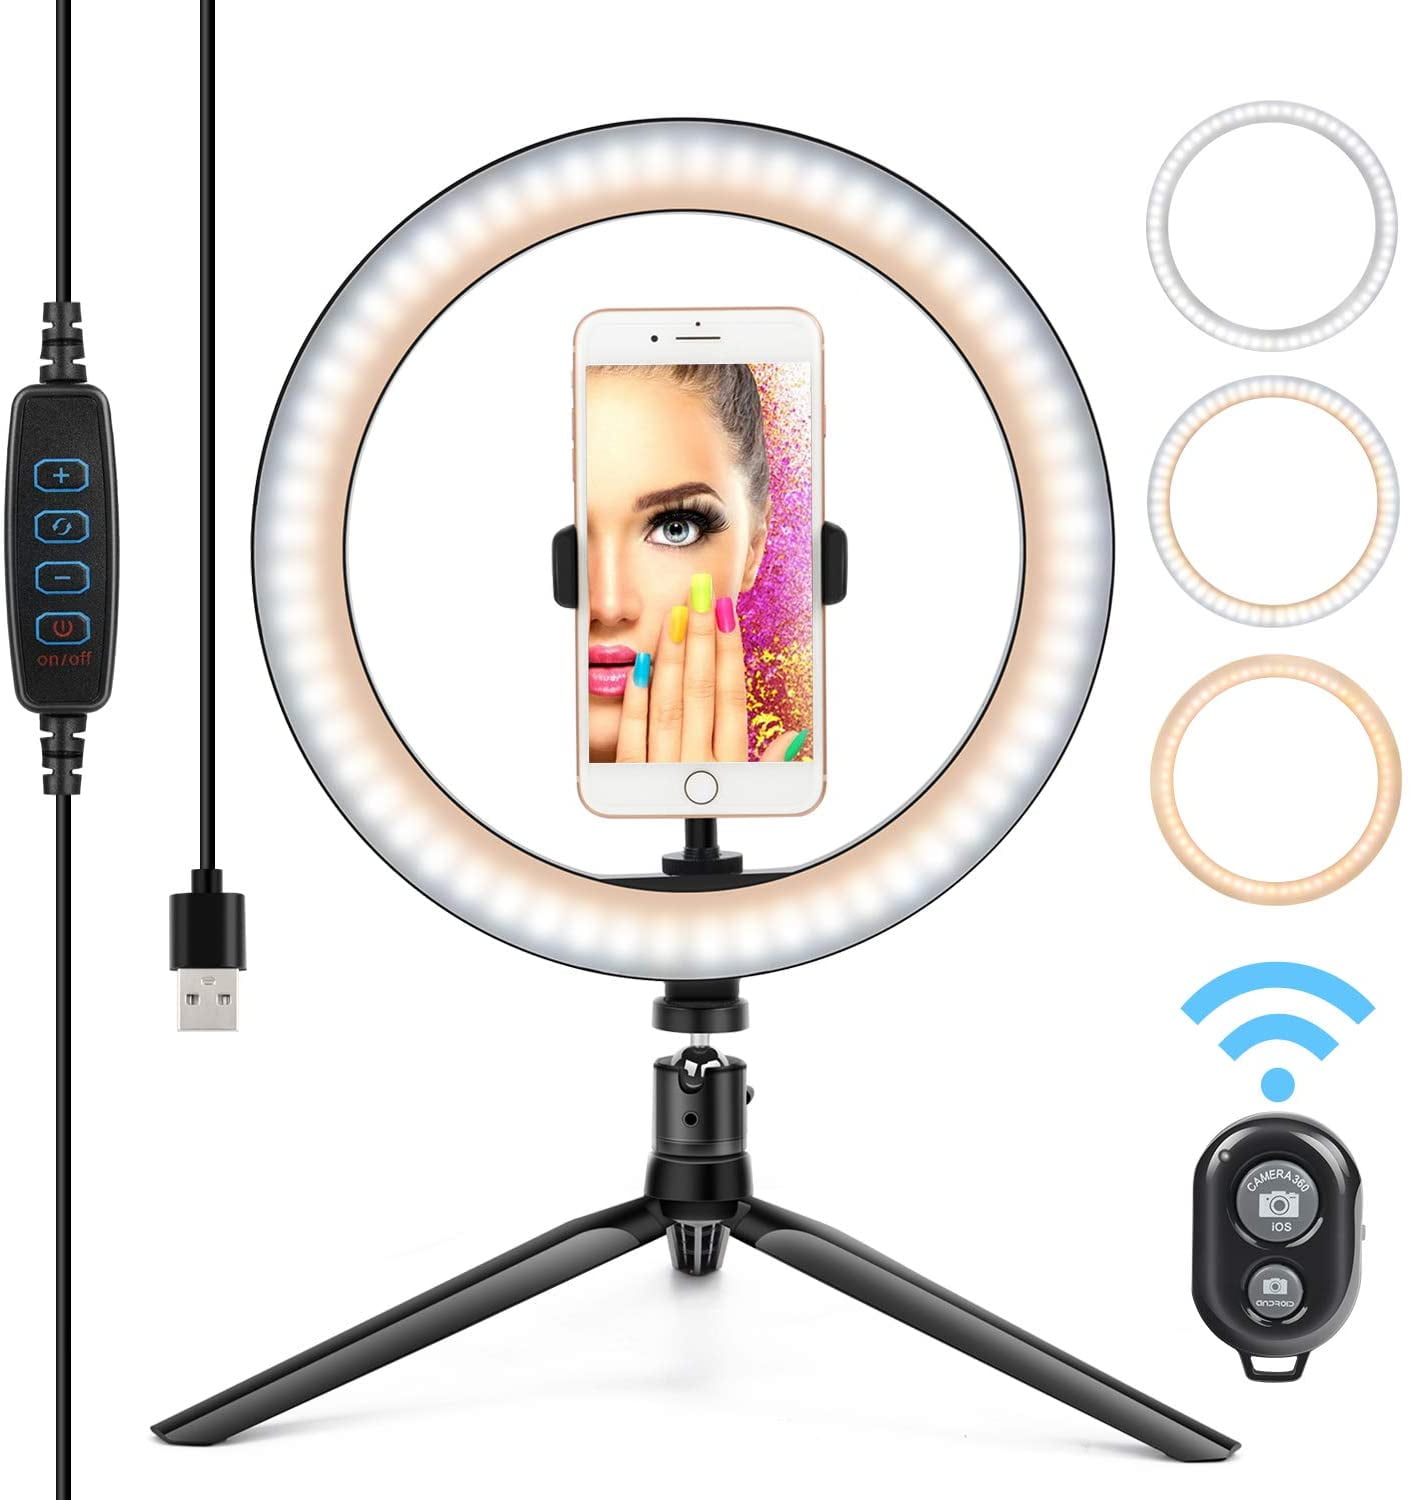 Clip on Desk Video Conference Ring Light for Zoom Meeting,Make up Tiktok 10 inch Selfie Ring Light with Clamp Mount SEBIDER Ring Light for Computer,Laptop Live Streaming Photography YouTube